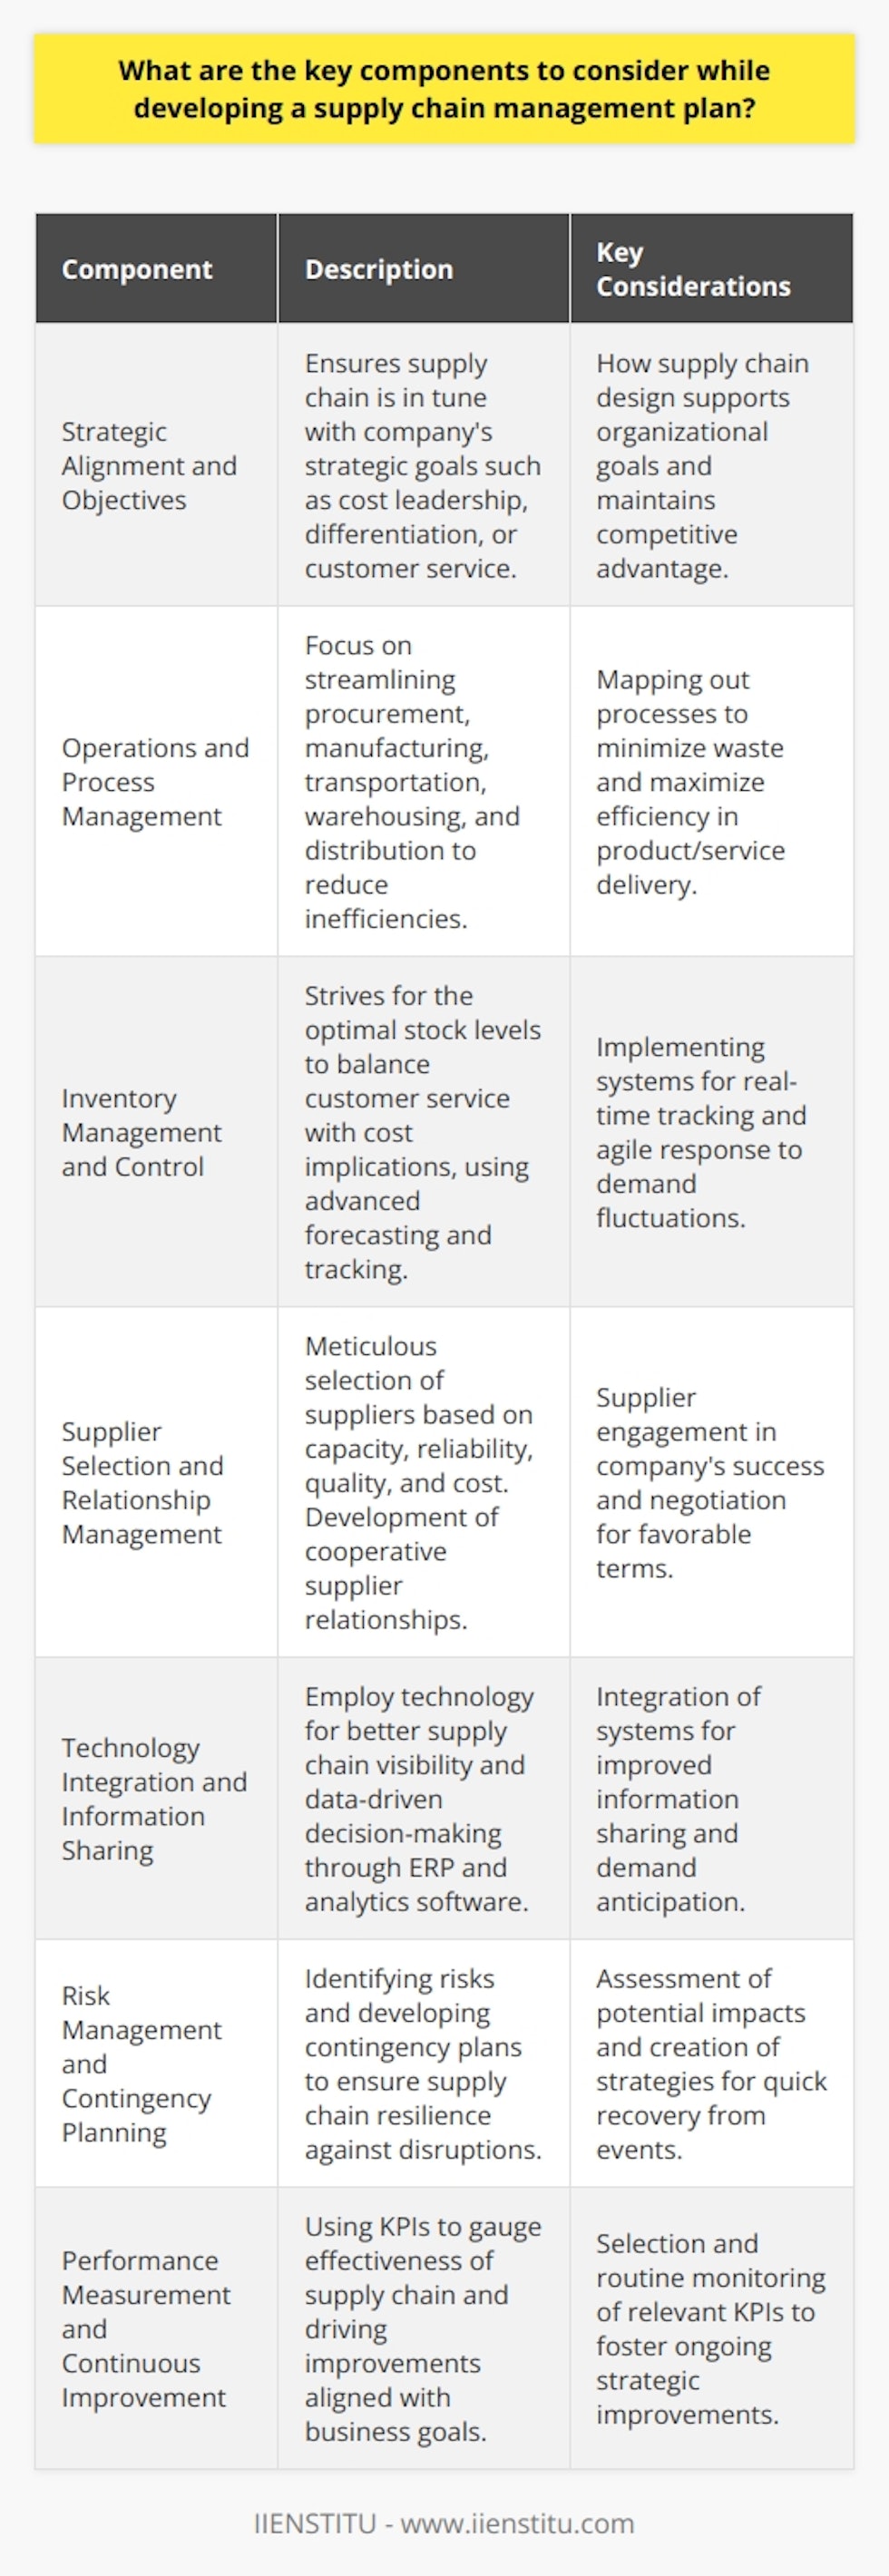 Developing a comprehensive supply chain management plan is essential for the success of modern businesses. Here are the key components that should be evaluated and integrated into a strategic supply chain management framework.**Strategic Alignment and Objectives**The foundation of a strong supply chain management plan lies in its alignment with the strategic objectives of the company. The supply chain should be designed to support the organization's goals, whether striving for cost leadership, differentiation, or a focus on customer service excellence. The overall vision of the company should dictate the structure and operation of the supply chain to maintain a competitive advantage.**Operations and Process Management**Central to supply chain management is a thorough understanding and streamlining of the entire operations process. This includes procurement, manufacturing, transportation, warehousing, and distribution. Each step should be carefully mapped out to eliminate inefficiencies, reduce waste, and ensure that products and services are delivered in the most effective manner.**Inventory Management and Control**Effective inventory control balances customer service and cost implications by maintaining adequate stock levels. Advanced forecasting models, real-time inventory tracking, and agile response systems are vital in managing the ebb and flow of product demand and supply. The goal is to minimize stockouts and reduce excess inventory that can tie up valuable resources.**Supplier Selection and Relationship Management**Suppliers serve as critical links in any supply chain and thus need to be selected with meticulous attention to capacity, reliability, quality, and cost. After selection, fostering cooperative relationships and open communication with suppliers enhances their involvement in the company's success while enabling negotiation for better terms and prioritization in times of limited supply.**Technology Integration and Information Sharing**Technology paves the way for significant enhancements in supply chain management by increasing visibility and enabling data-driven decision-making. Integrating systems such as ERP, supply chain management software, and advanced analytics facilitates information sharing across the supply chain network. This integration helps in anticipating demand changes, adjusting production schedules, and managing inventory levels effectively.**Risk Management and Contingency Planning**Due to the complexity and interconnectedness of supply chains, risks ranging from supplier insolvencies, geopolitical tensions, to natural disasters can disrupt operations. Identifying risks, assessing their potential impact, and developing robust contingency plans ensure that the supply chain can withstand and recover quickly from unforeseen events.**Performance Measurement and Continuous Improvement**The effectiveness of a supply chain cannot be gauged without clear performance metrics. Identifying the right KPIs that align with business goals, routinely monitoring these, and using them to drive strategic improvements is crucial. Continuous improvement driven by KPIs ensures the supply chain remains efficient, competitive, and aligned with changing market demands.Key to the ongoing development and refinement of the supply chain management plan is remaining agile and open to innovation. Regularly revisiting and optimizing these components in line with evolving business and market conditions ensures that the supply chain serves as a strong competitive asset for any organization.